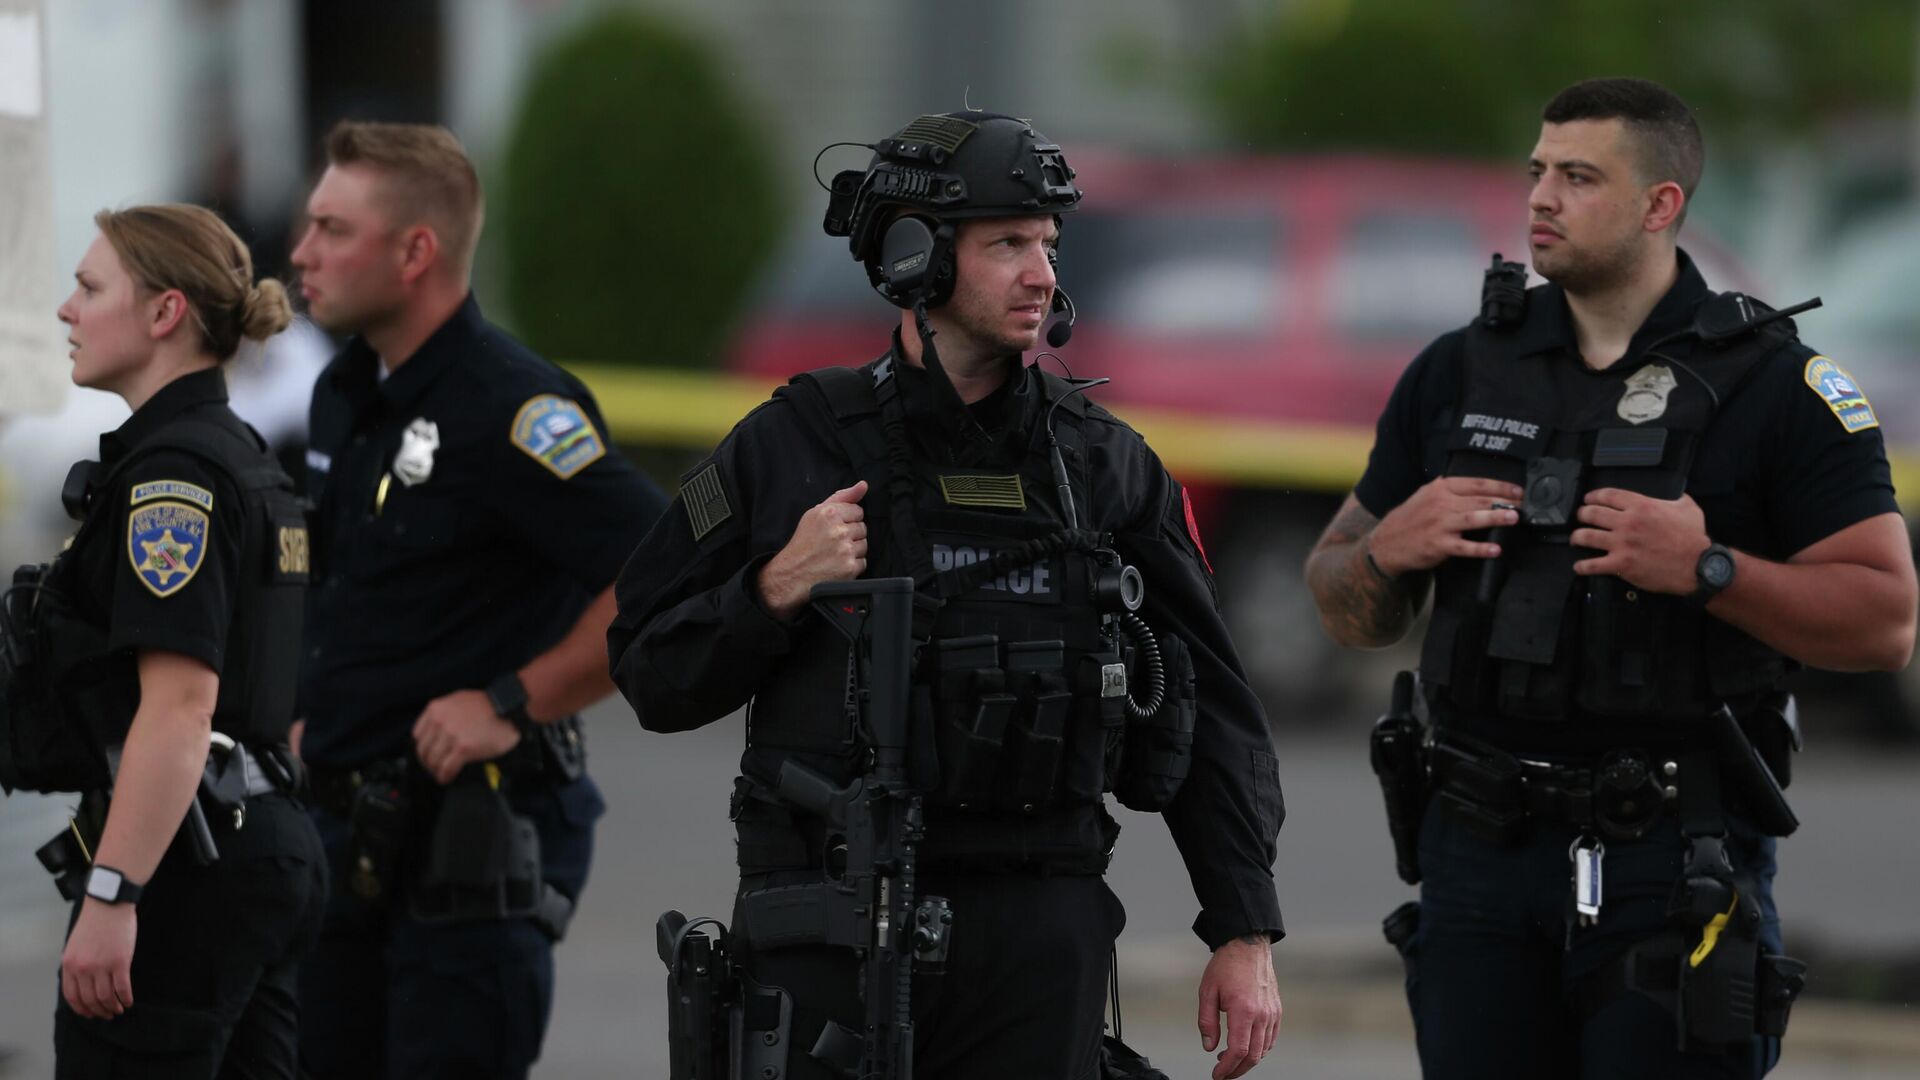 Police walk along the perimeter of the scene after a shooting at a supermarket on Saturday, May 14, 2022, in Buffalo, N.Y.  Officials said the gunman entered the supermarket with a rifle and opened fire. Investigators believe the man may have been livestreaming the shooting and were looking into whether he had posted a manifesto online.  - Sputnik International, 1920, 15.05.2022